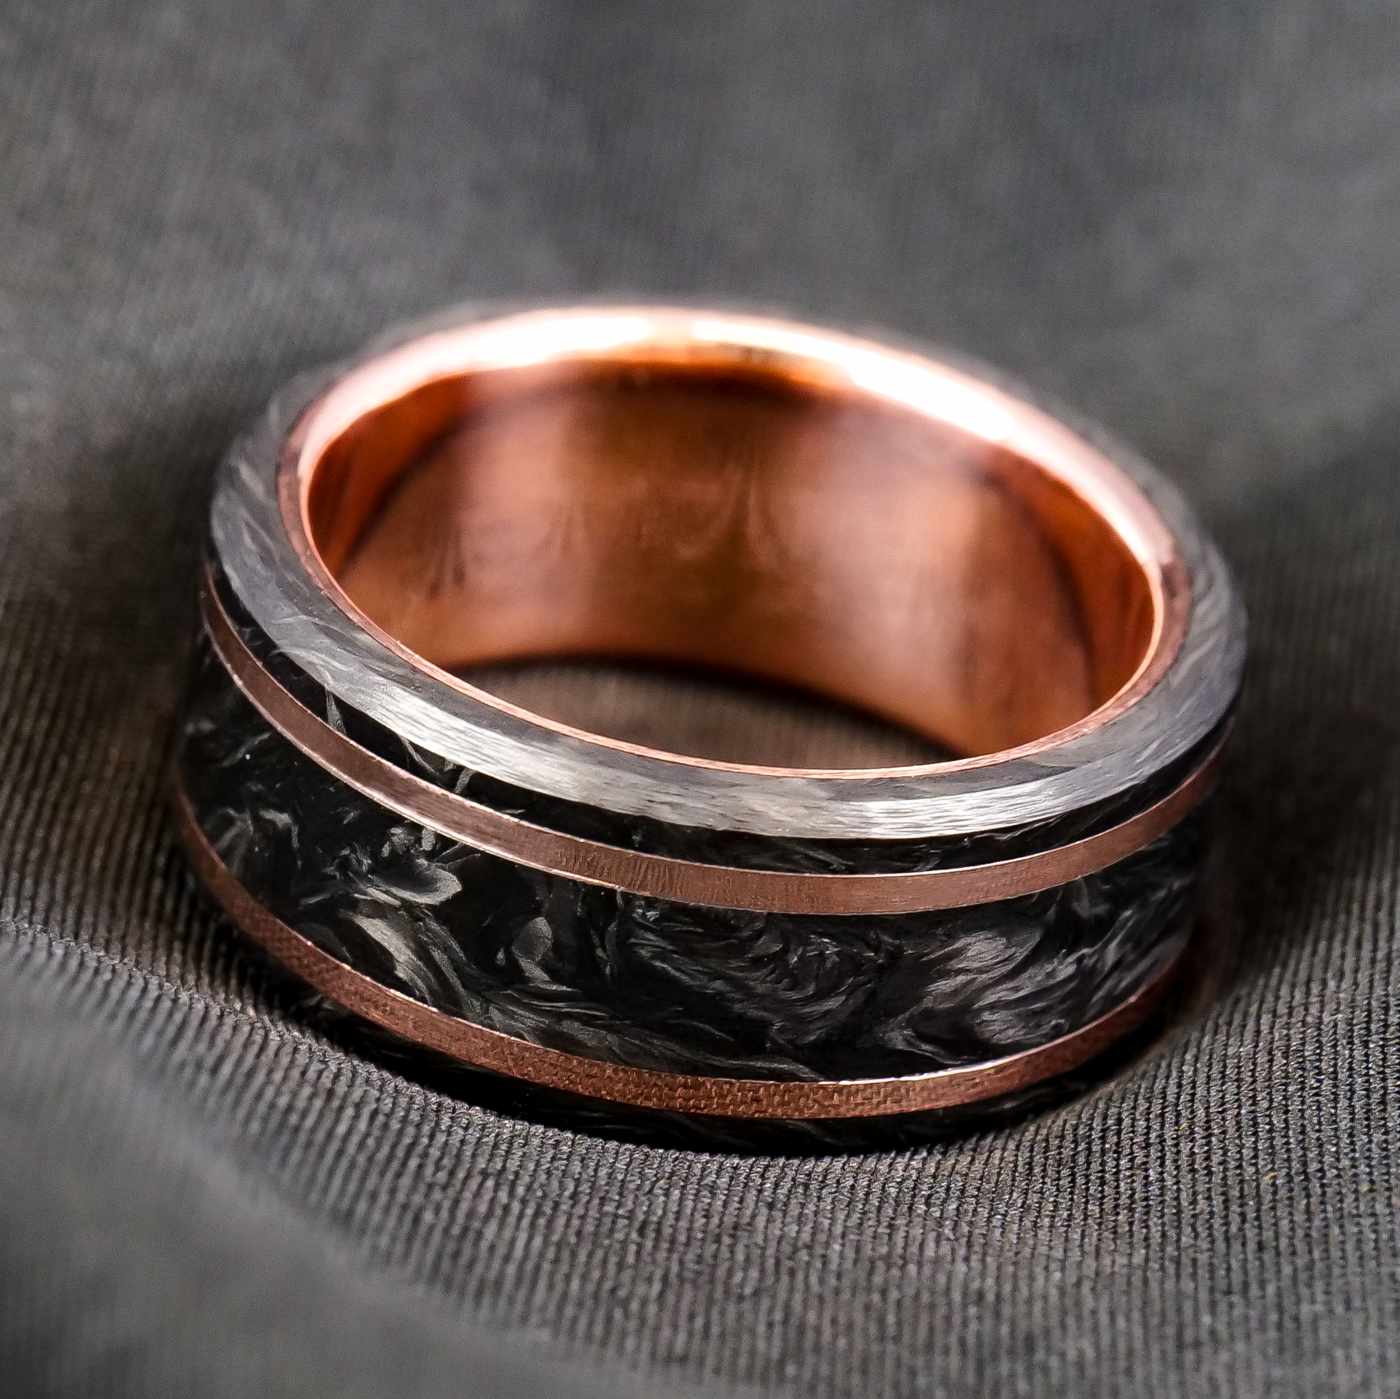 Forged Carbon Fiber and Gold Ring - Patrick Adair Designs